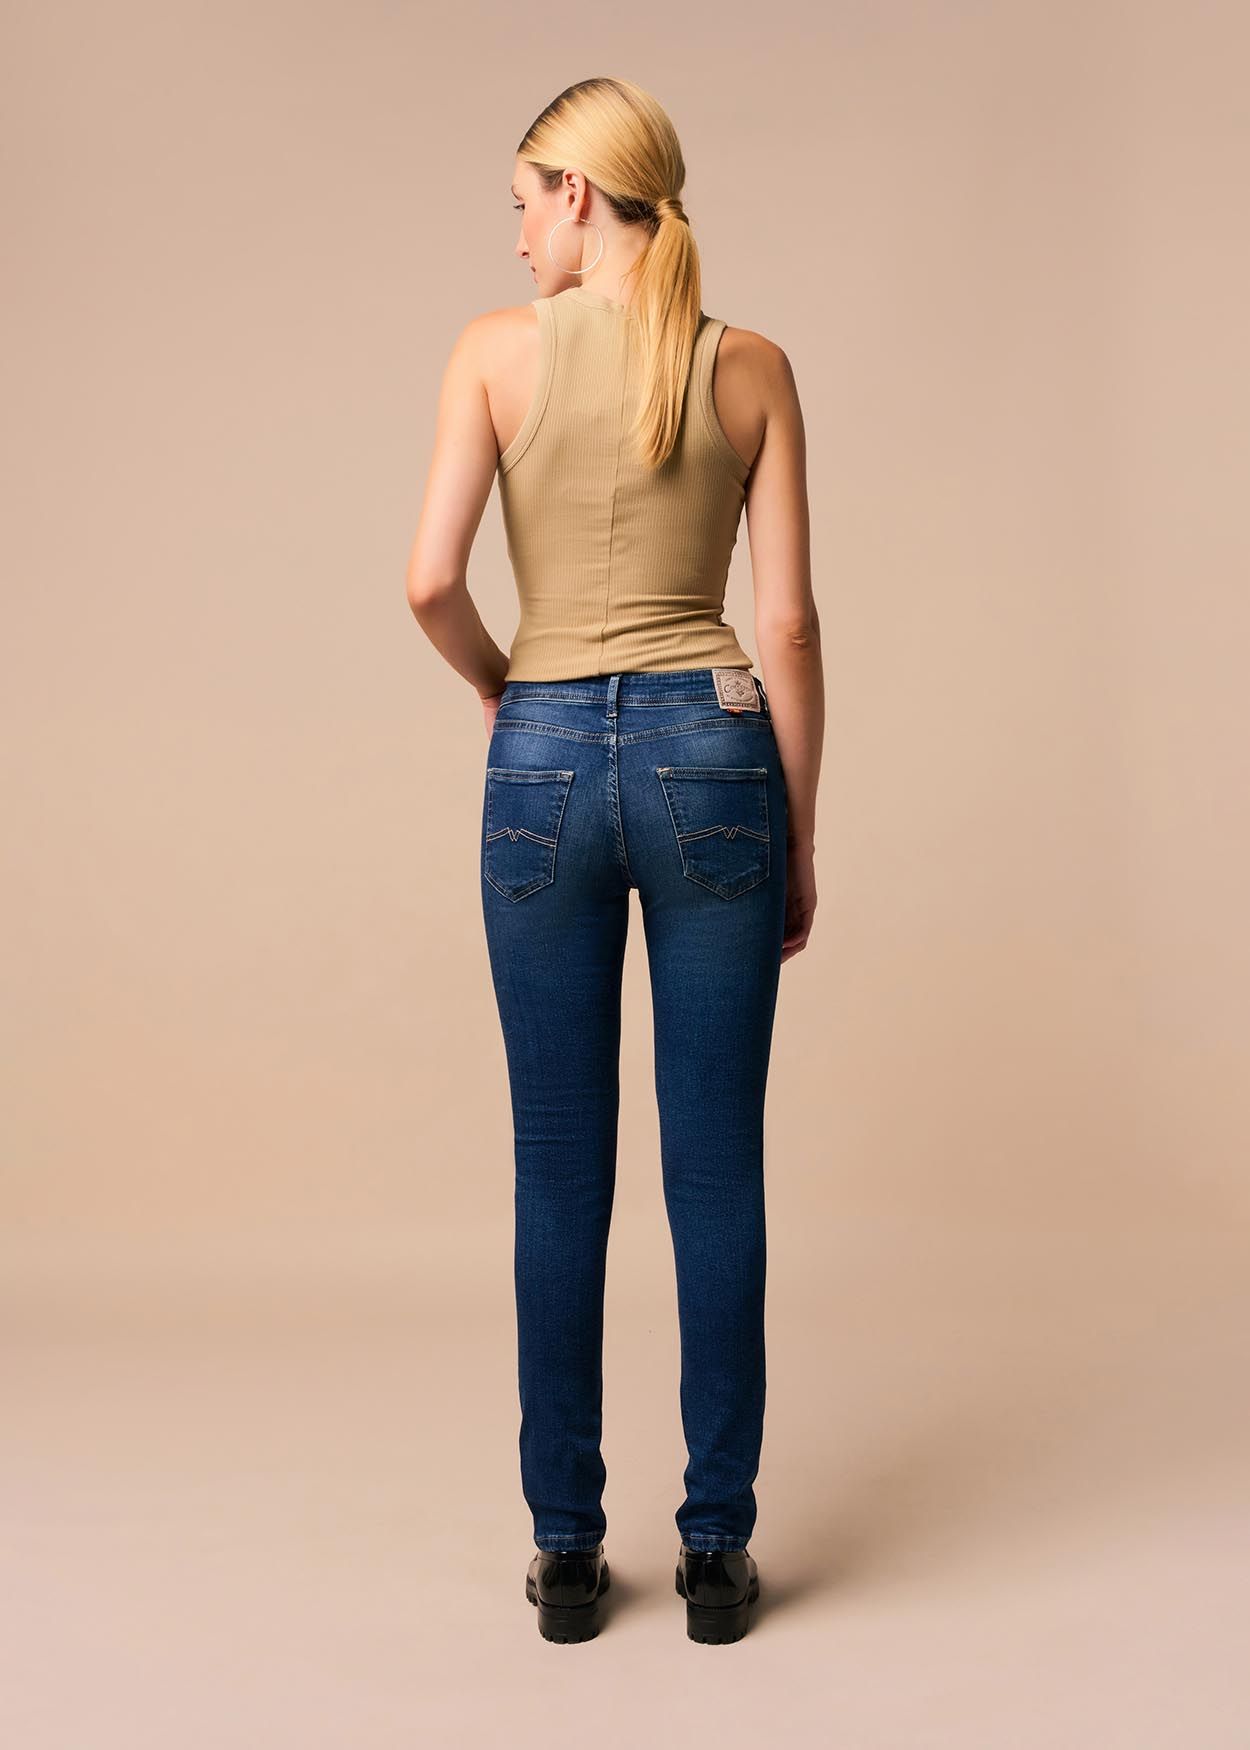 CASSIS KYRA - Jeans Taille Basse | Skinny  Fit | Taille en pouces Cimarron